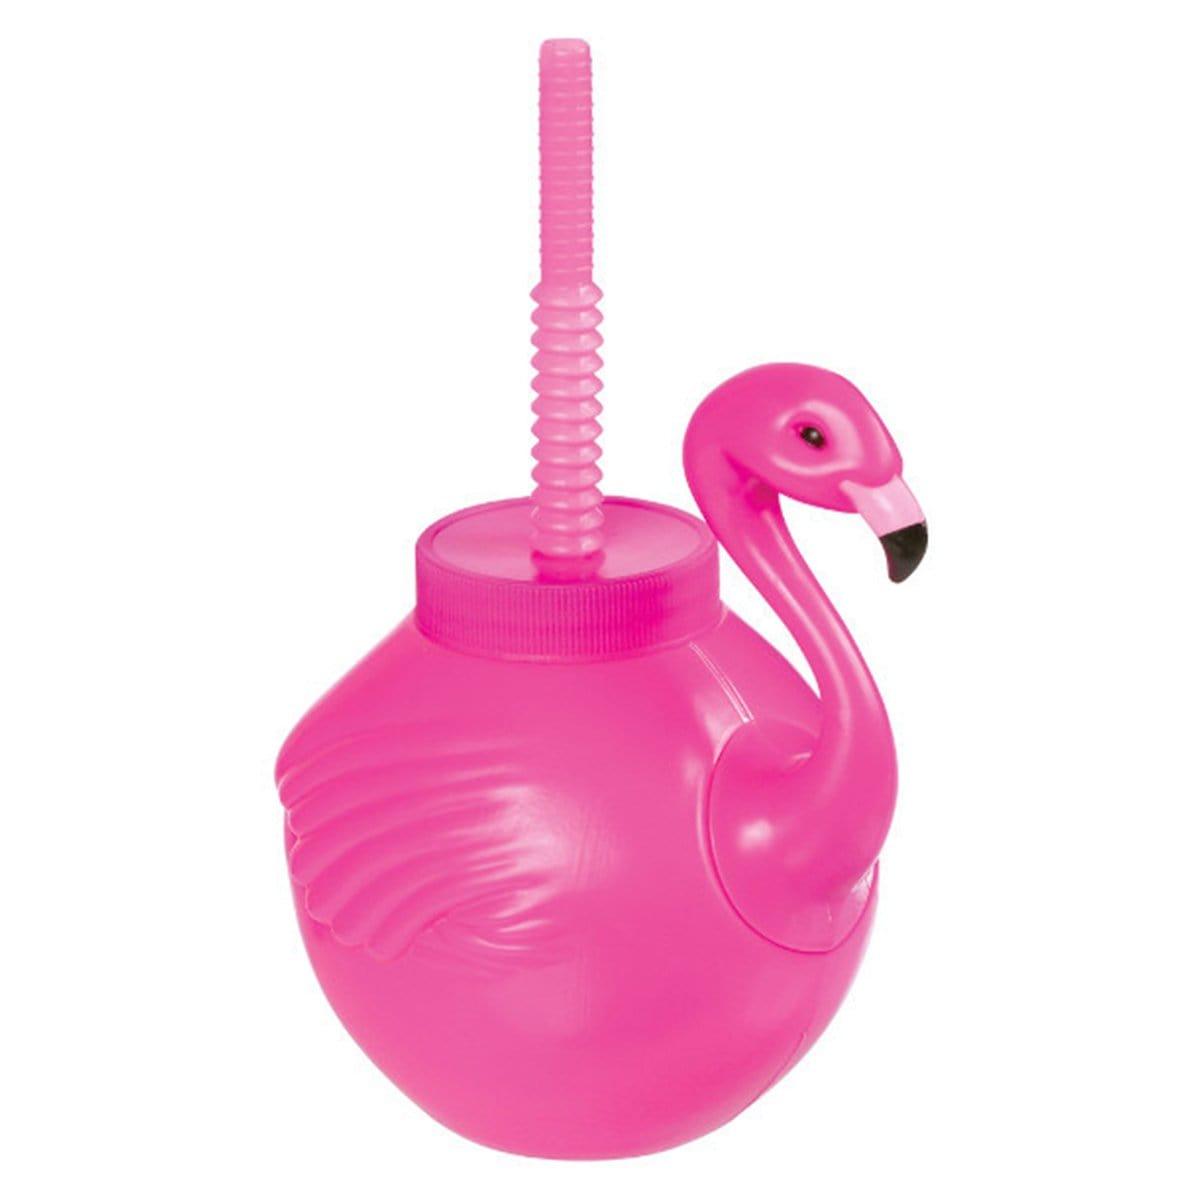 Buy Theme Party Flamingo Sippy Cup sold at Party Expert